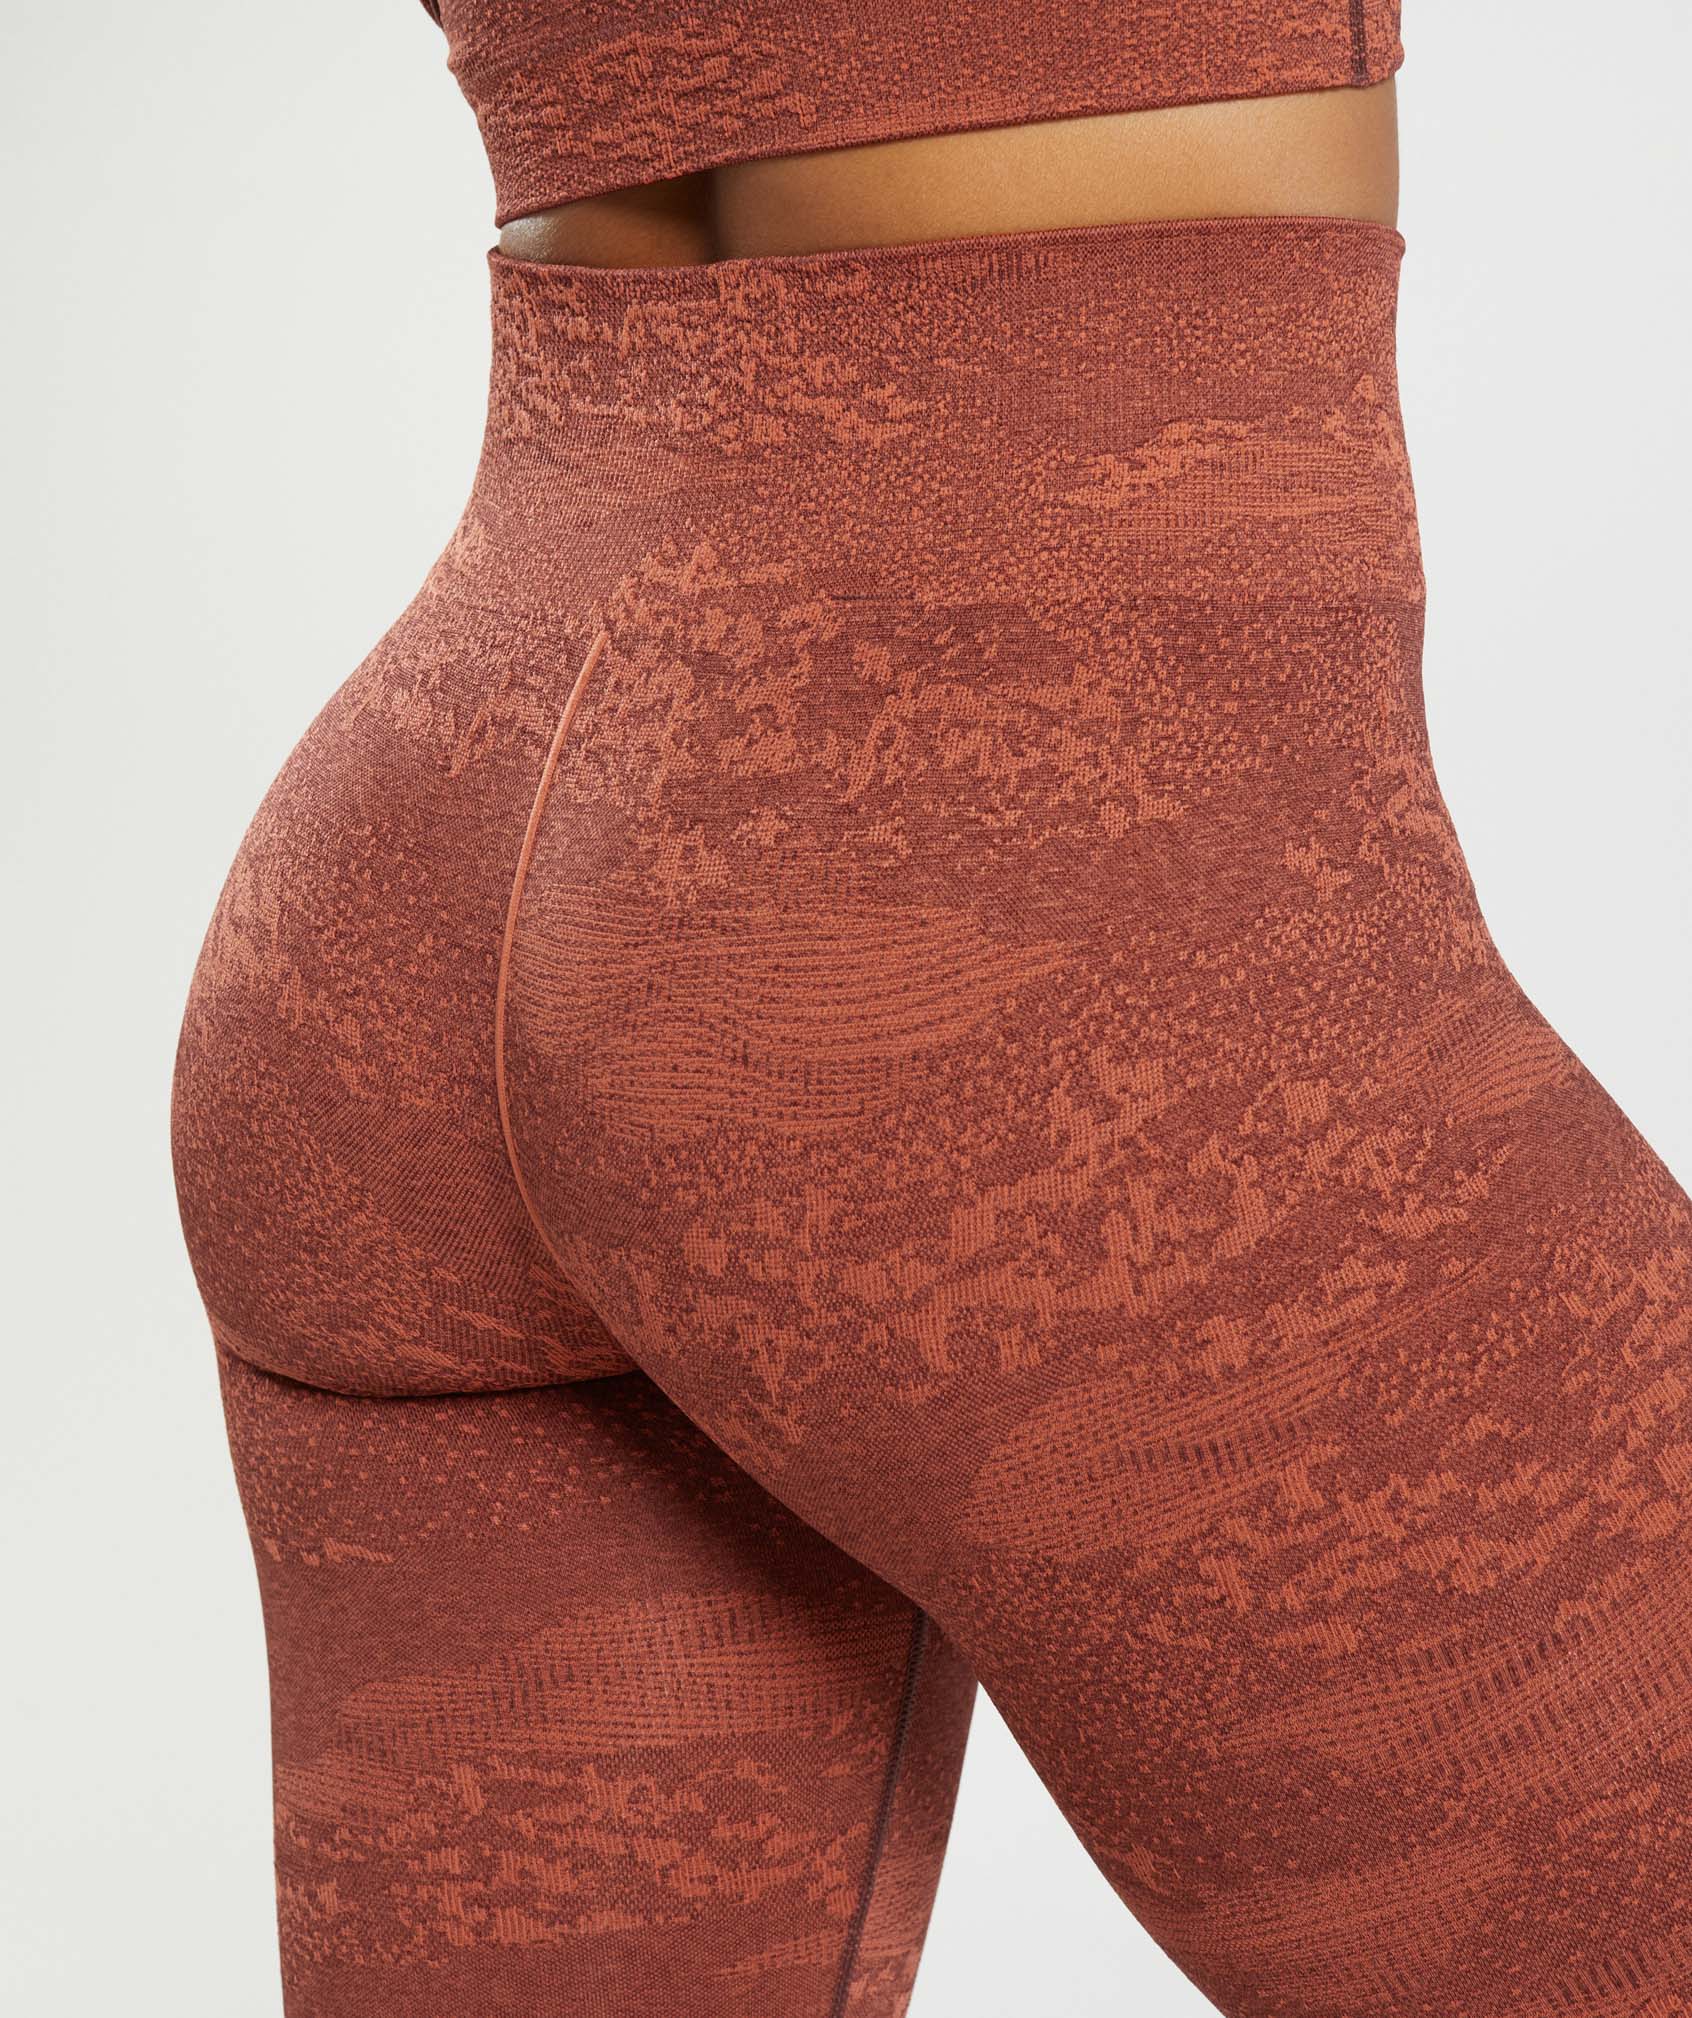 Adapt Camo Seamless Leggings in Storm Red/Cherry Brown - view 6